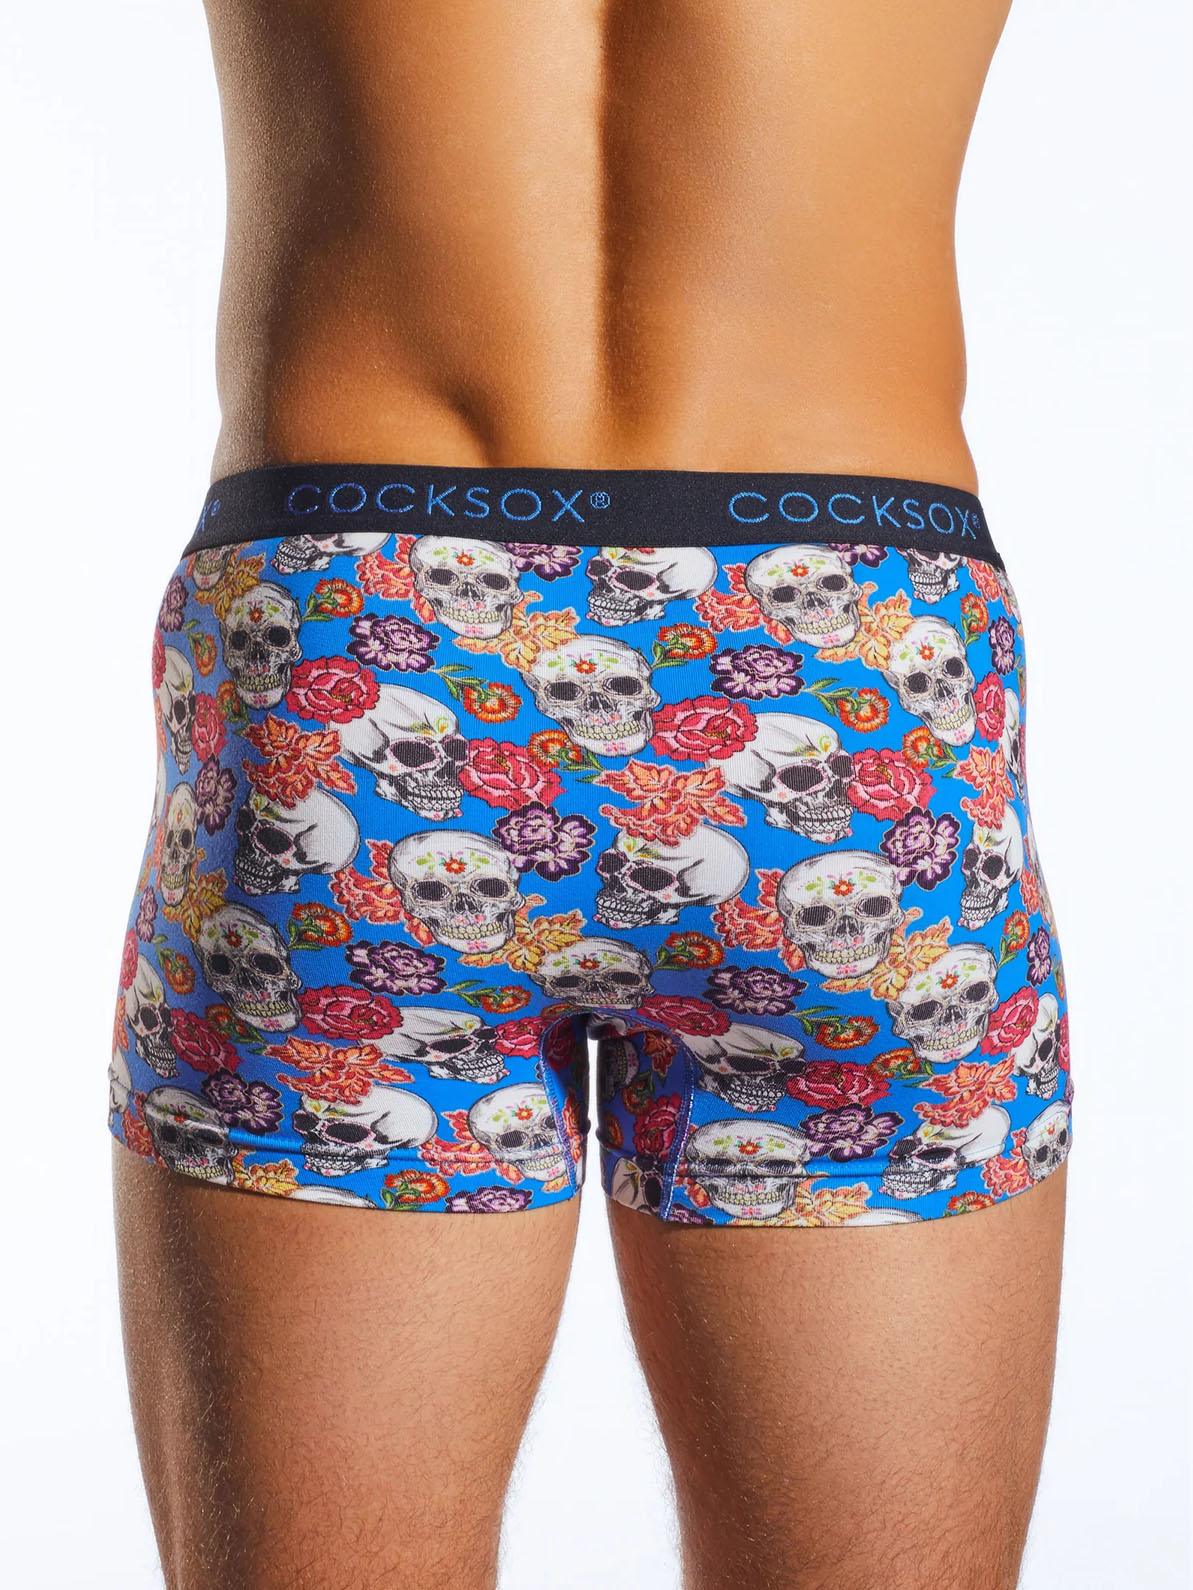 COCKSOX DAY OF THE DEAD BOXER - FullKit.com